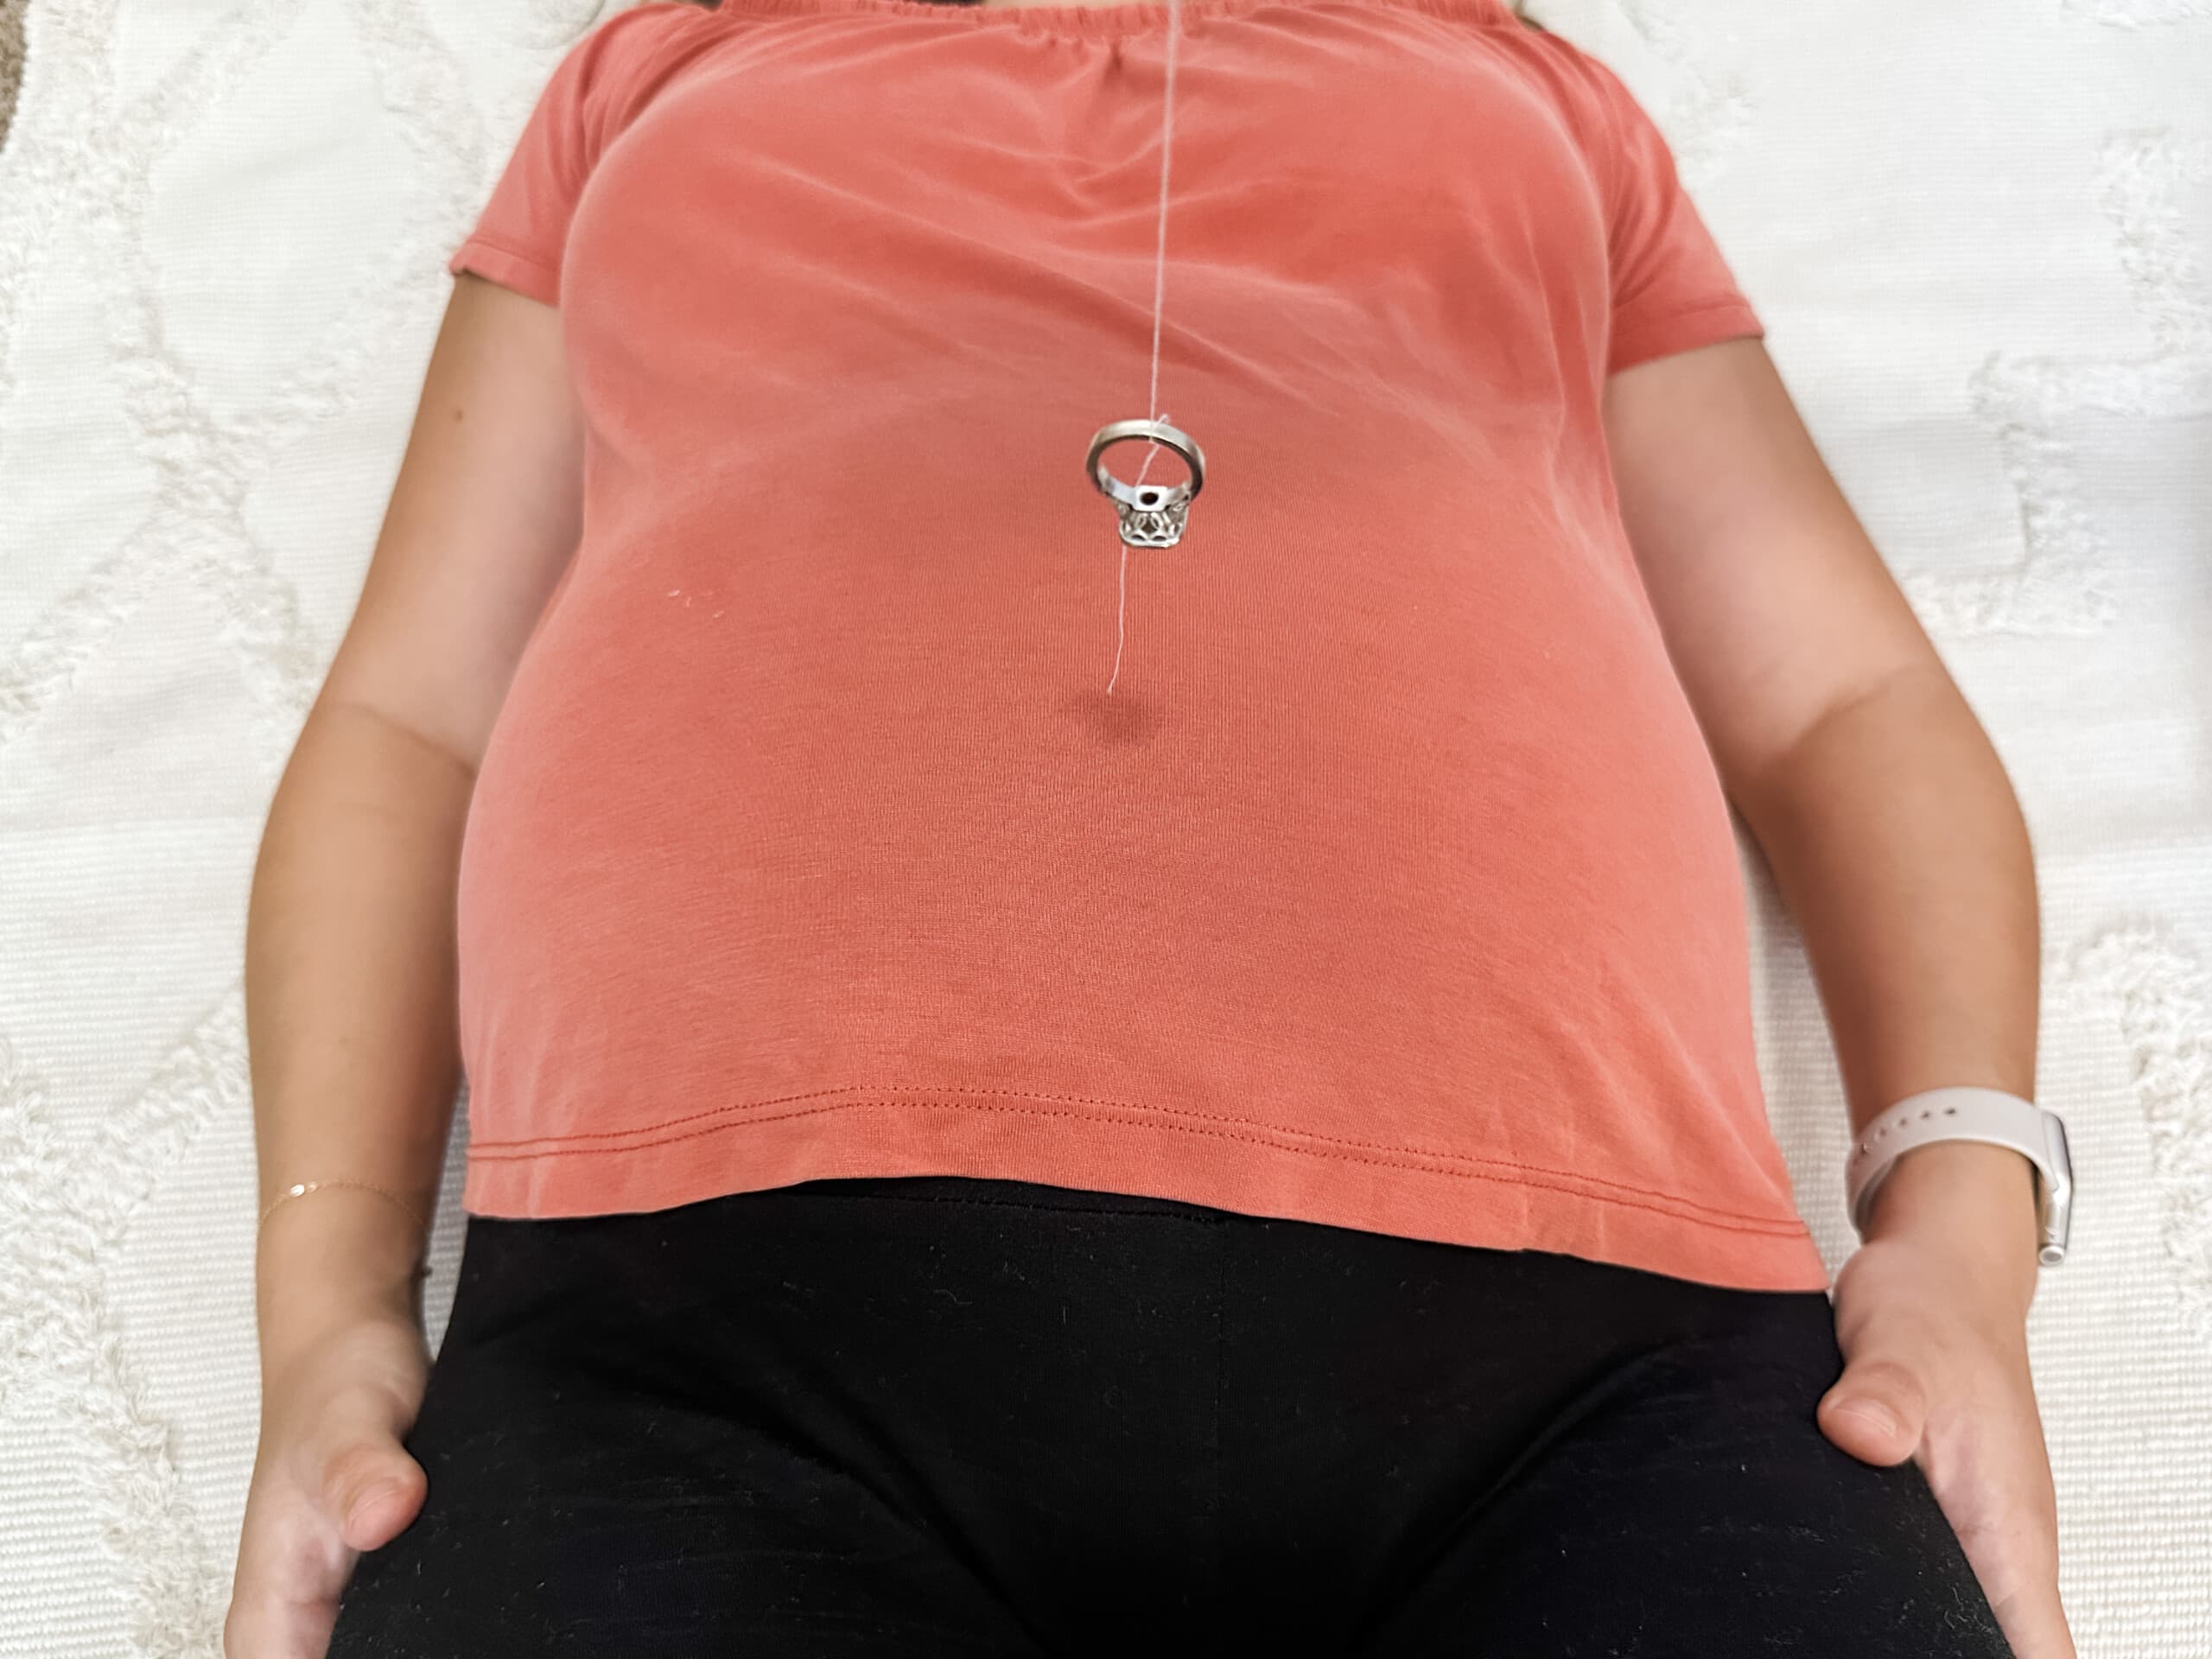 Pregnant woman laying down and there is a ring hanging on a string over her belly.